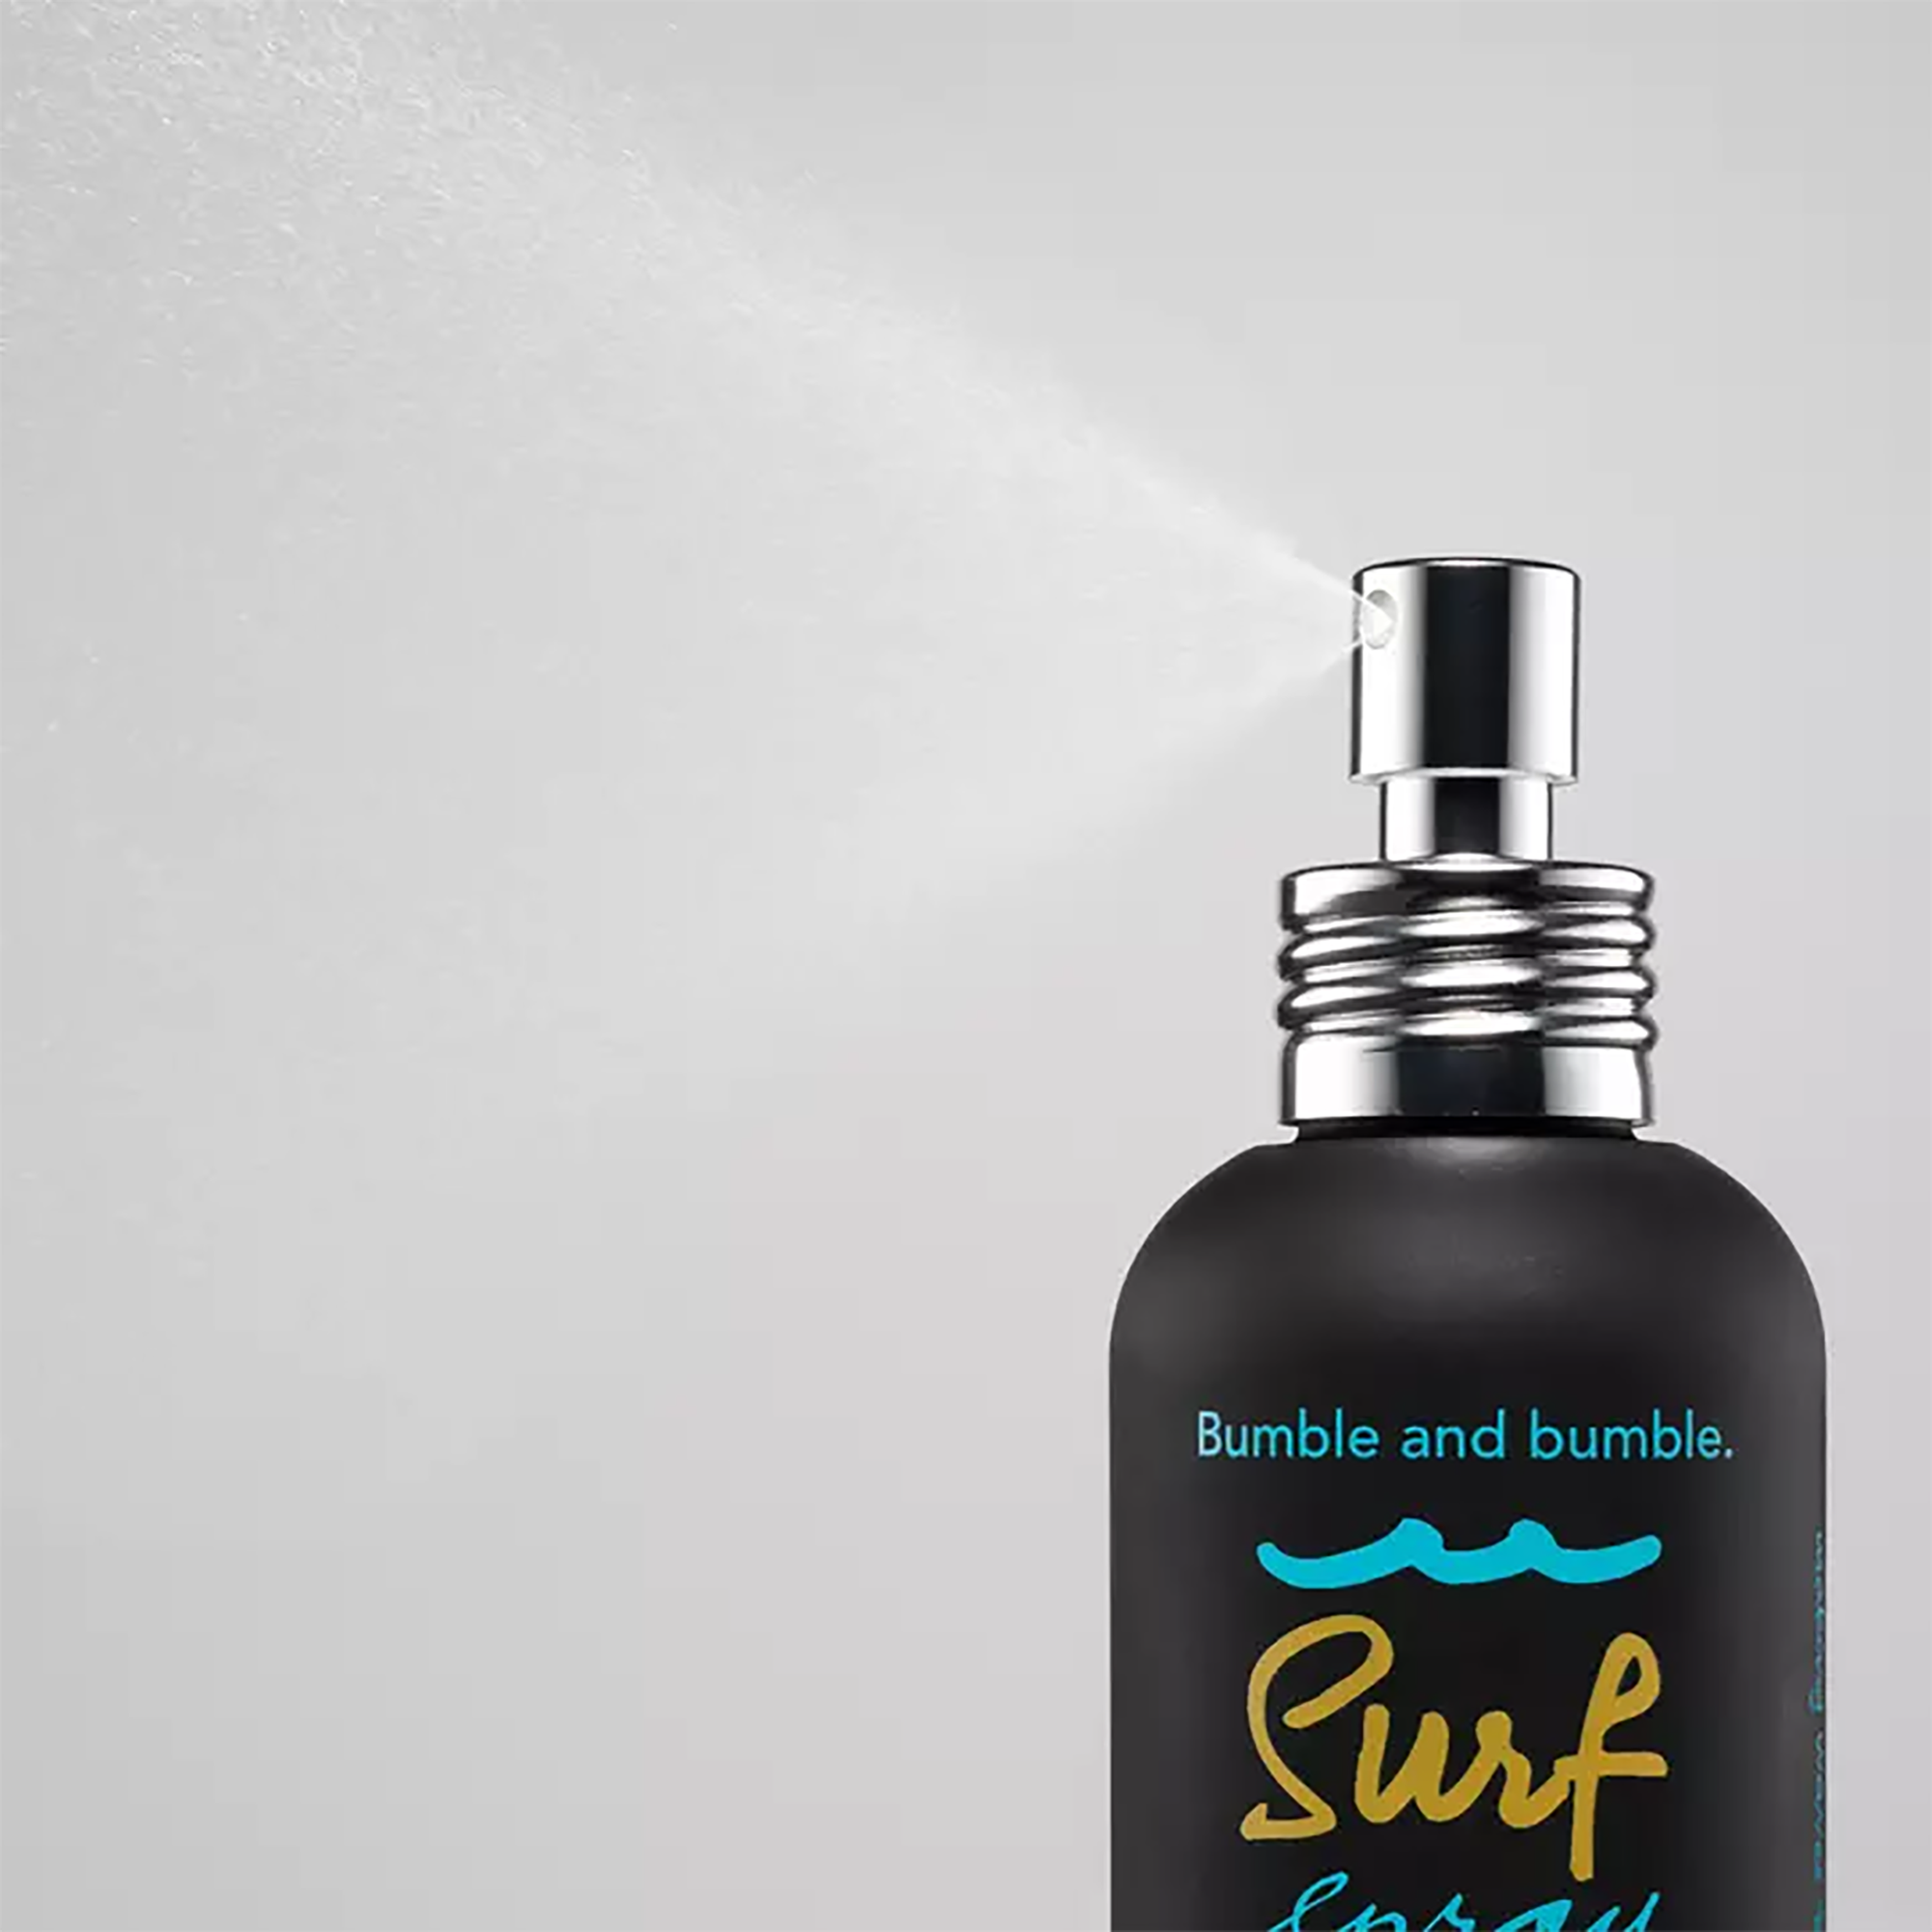 Bumble and bumble Surf Spray / 4OZ